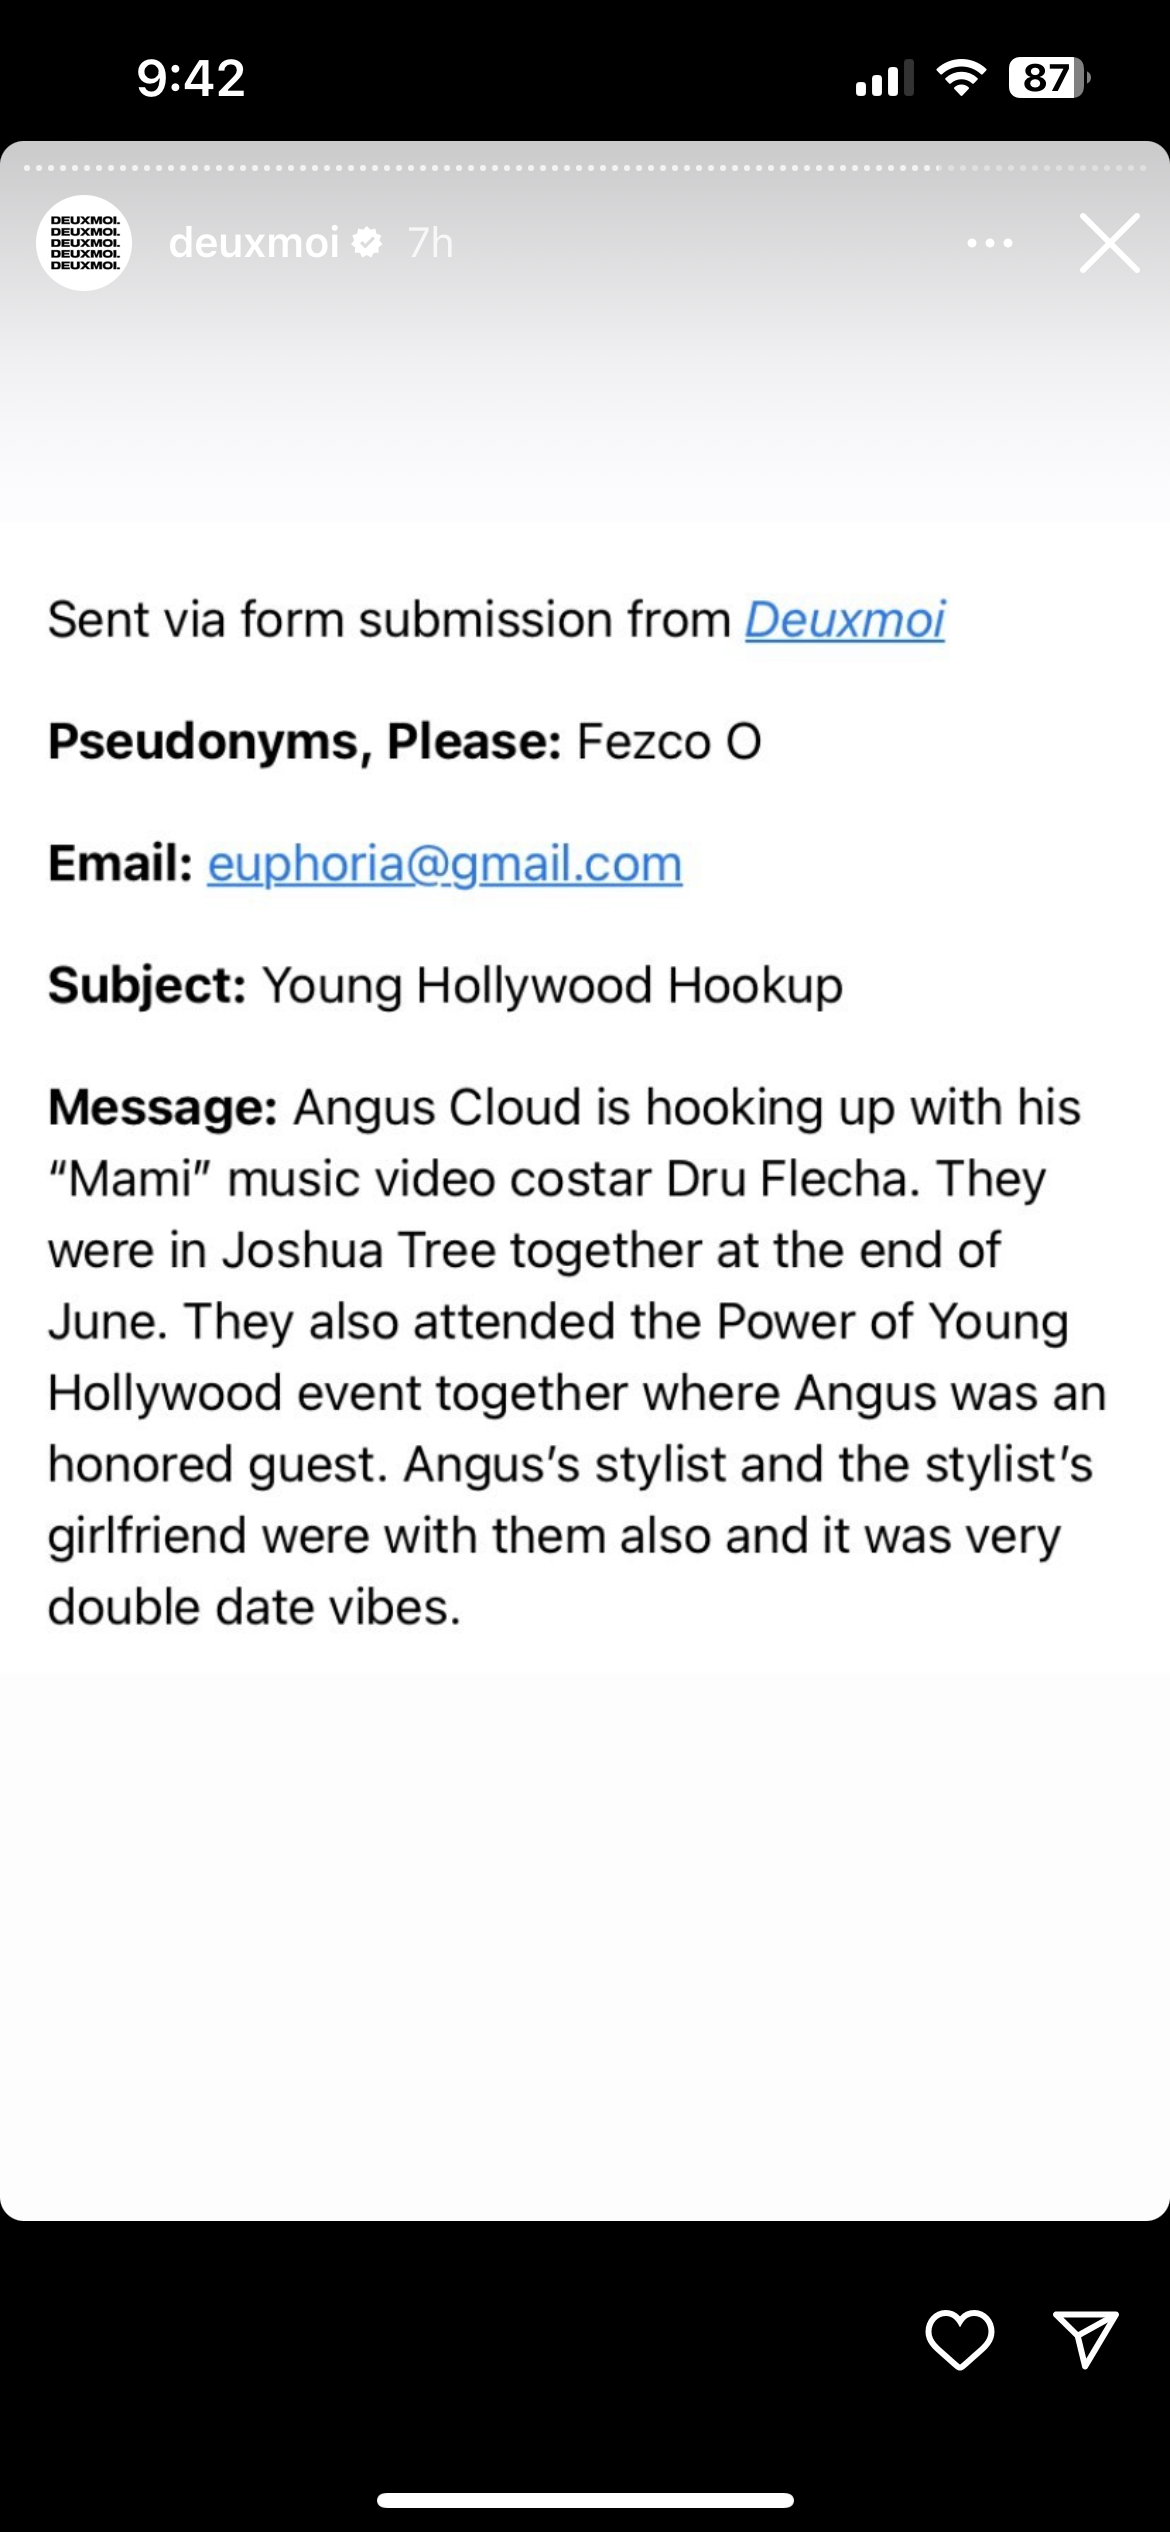 An anonymous tip confirming Angus Cloud's relationship with Dru Flecha to Deuxmoi